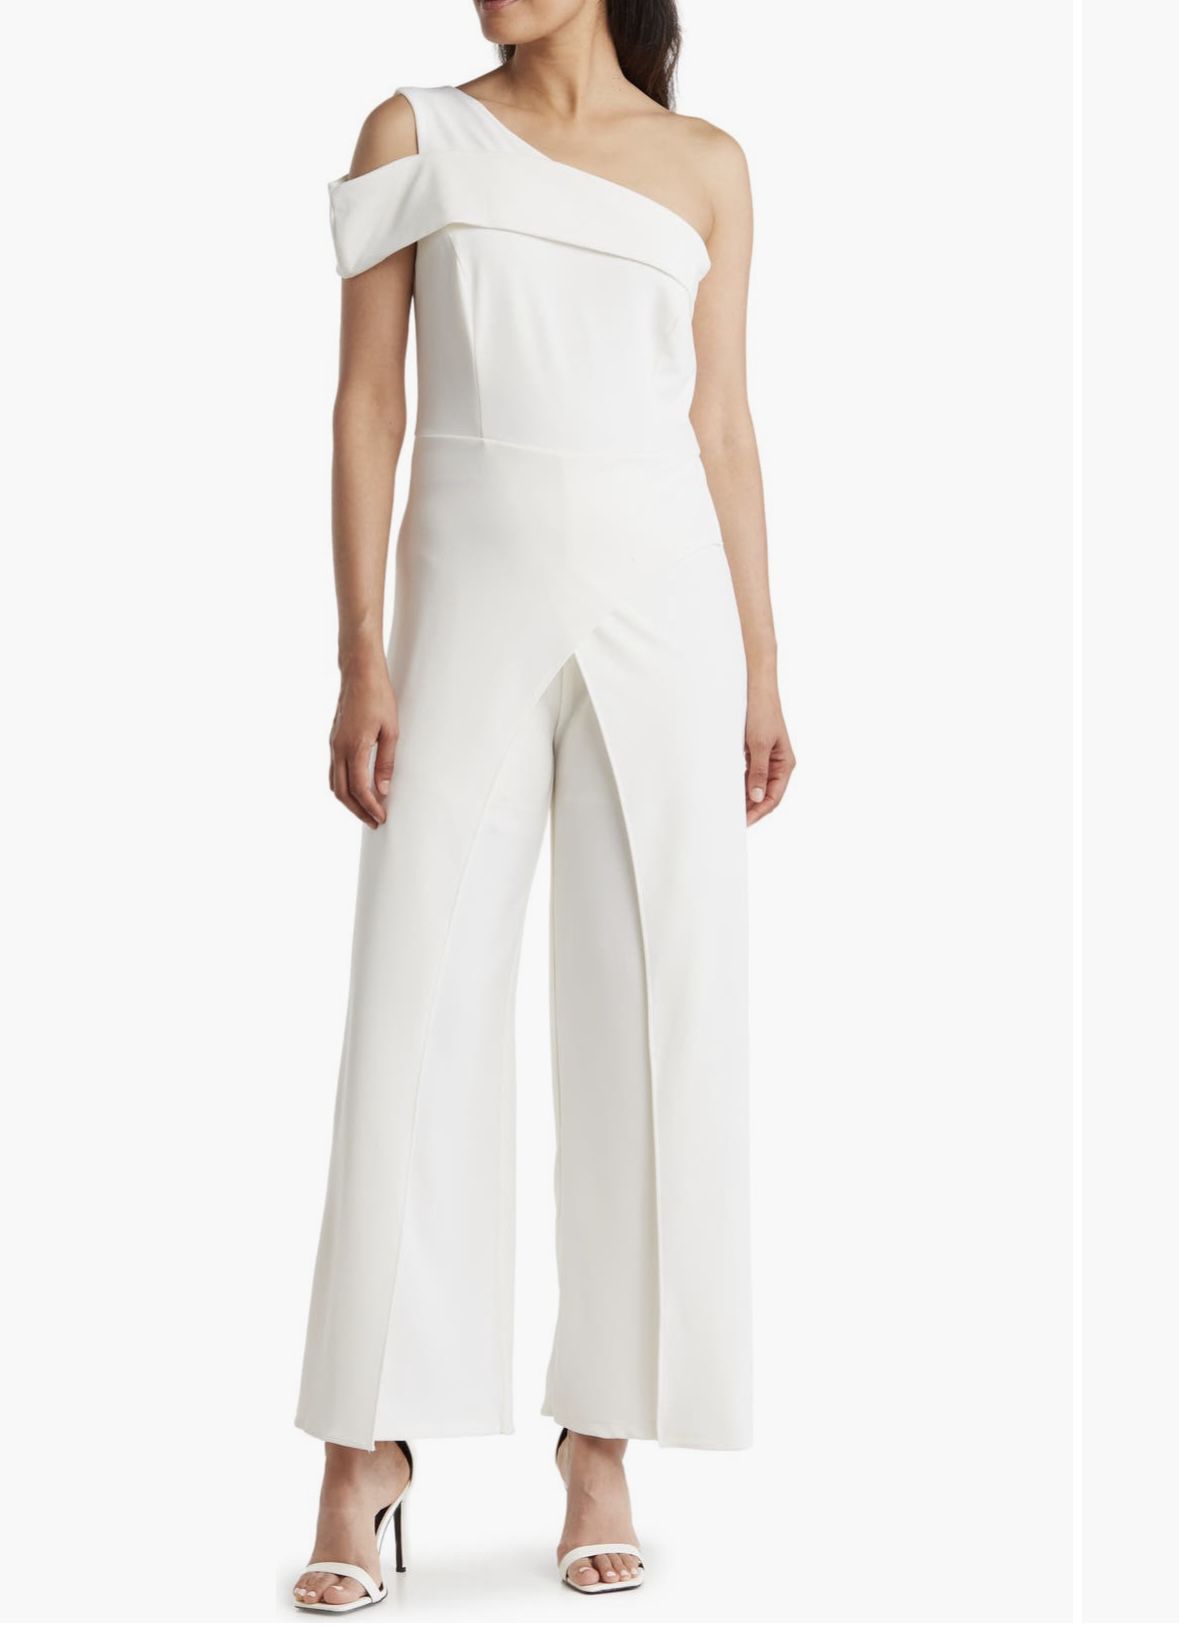 NEW! MARINA IVORY JUMPSUIT-ONE SHOULDER ASYMMETRIC-Size 12- with tags